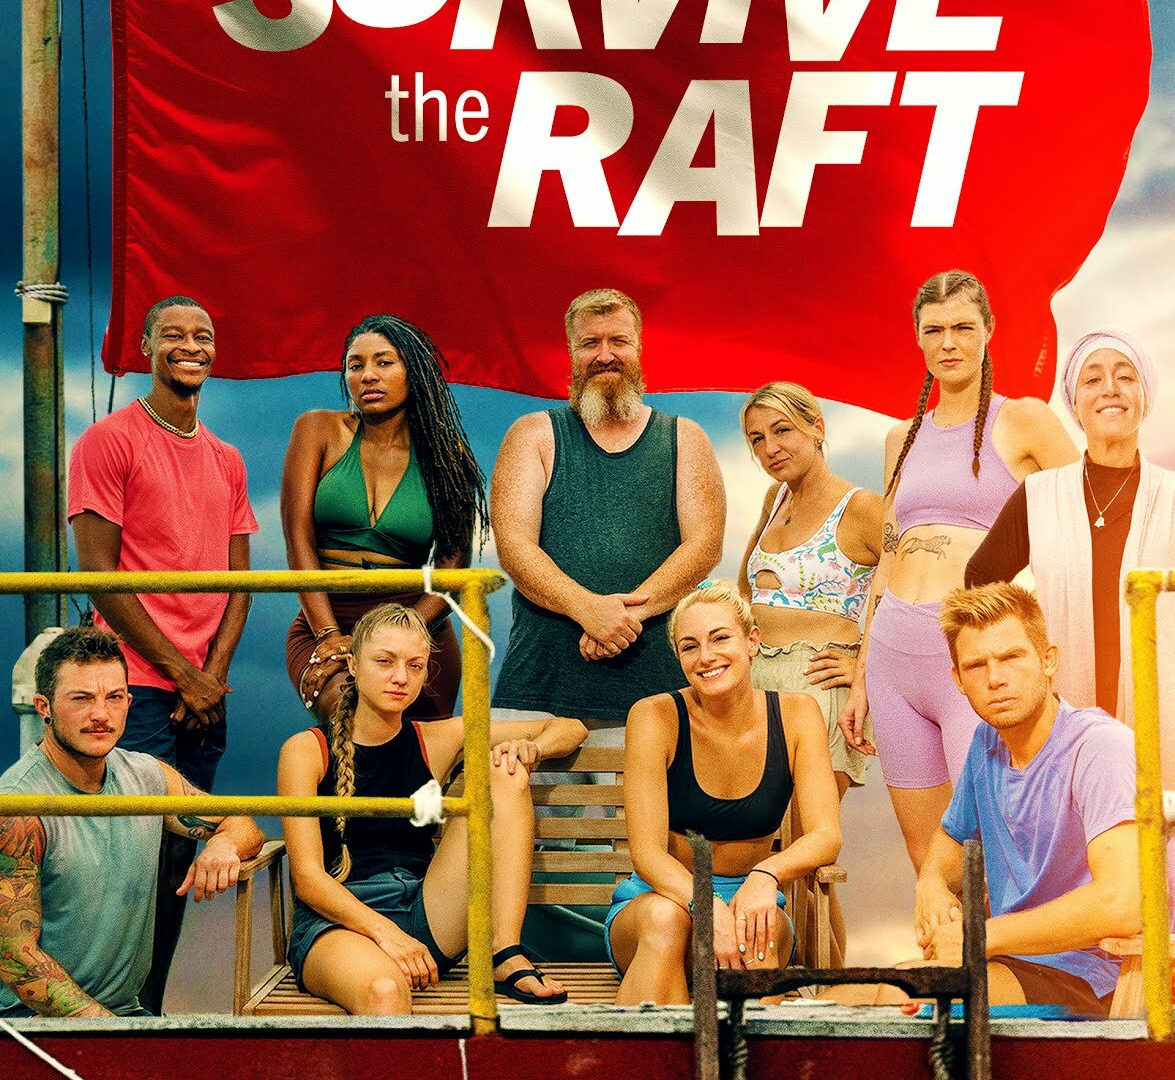 Show Survive the Raft